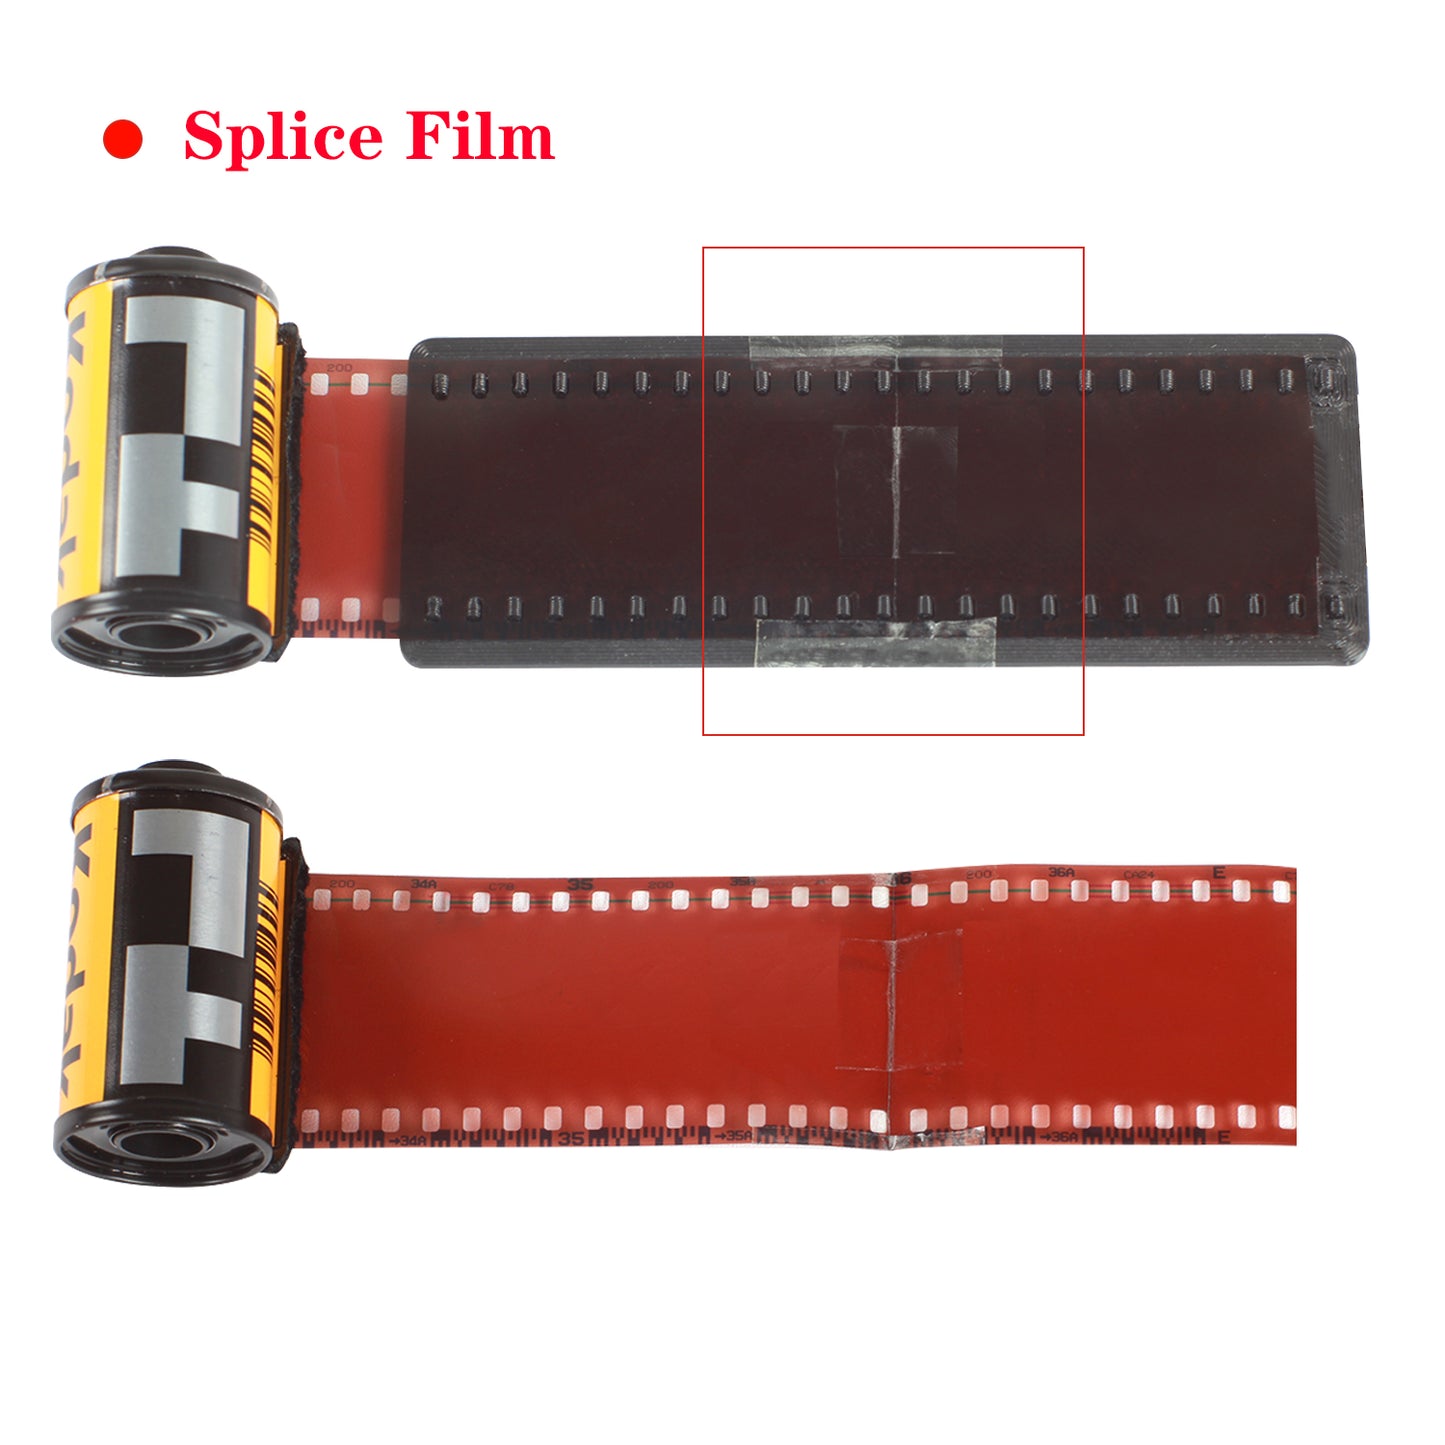 Multi-function Film Leader Cutter Trimming Template for Vintage Leica Ablon Barnack Leica 3a 3c m1 m2 m3 Film Cutting 5cm 10cm Guide Tool